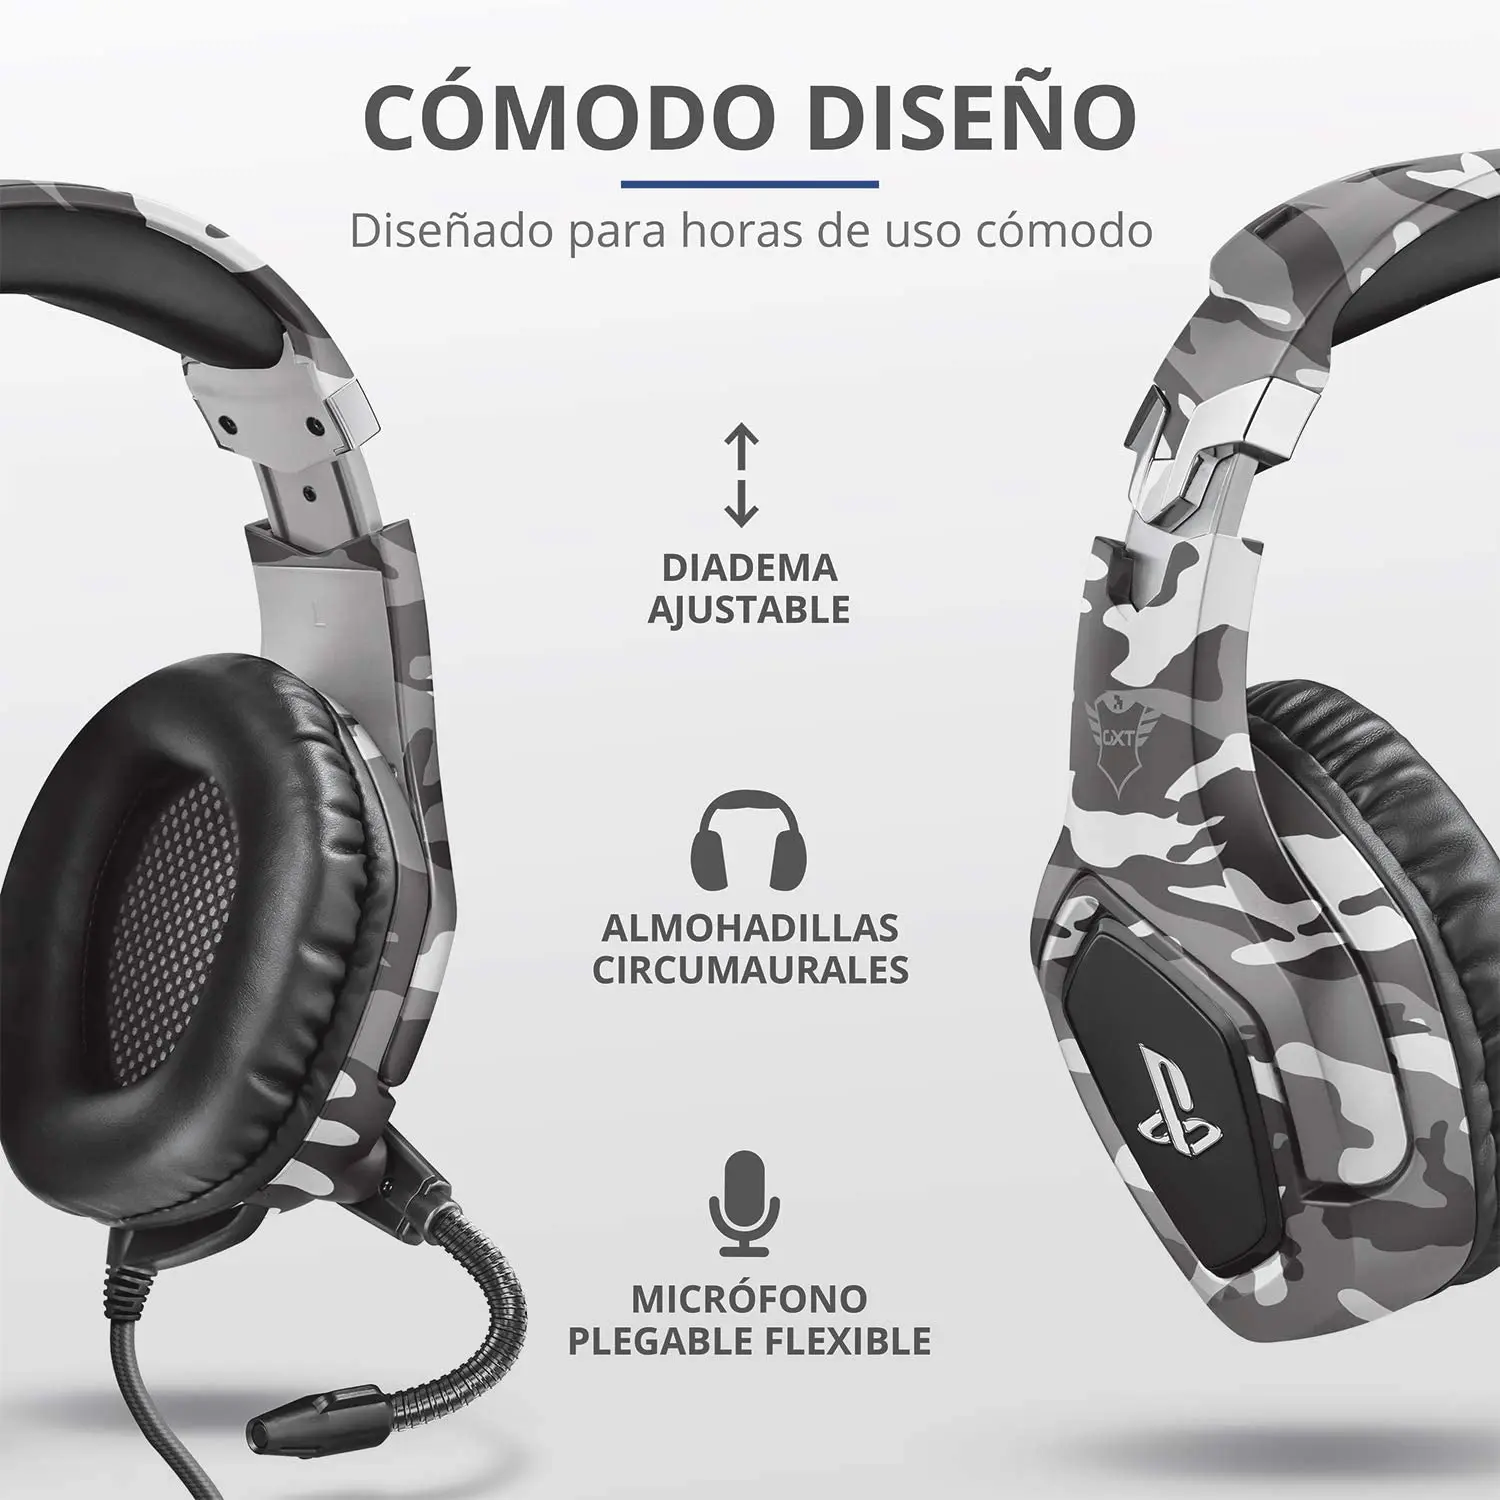 CASQUE GAMING FORZE POUR PLAYSTATION 5 / PLAYSTATION 4 LICENCE